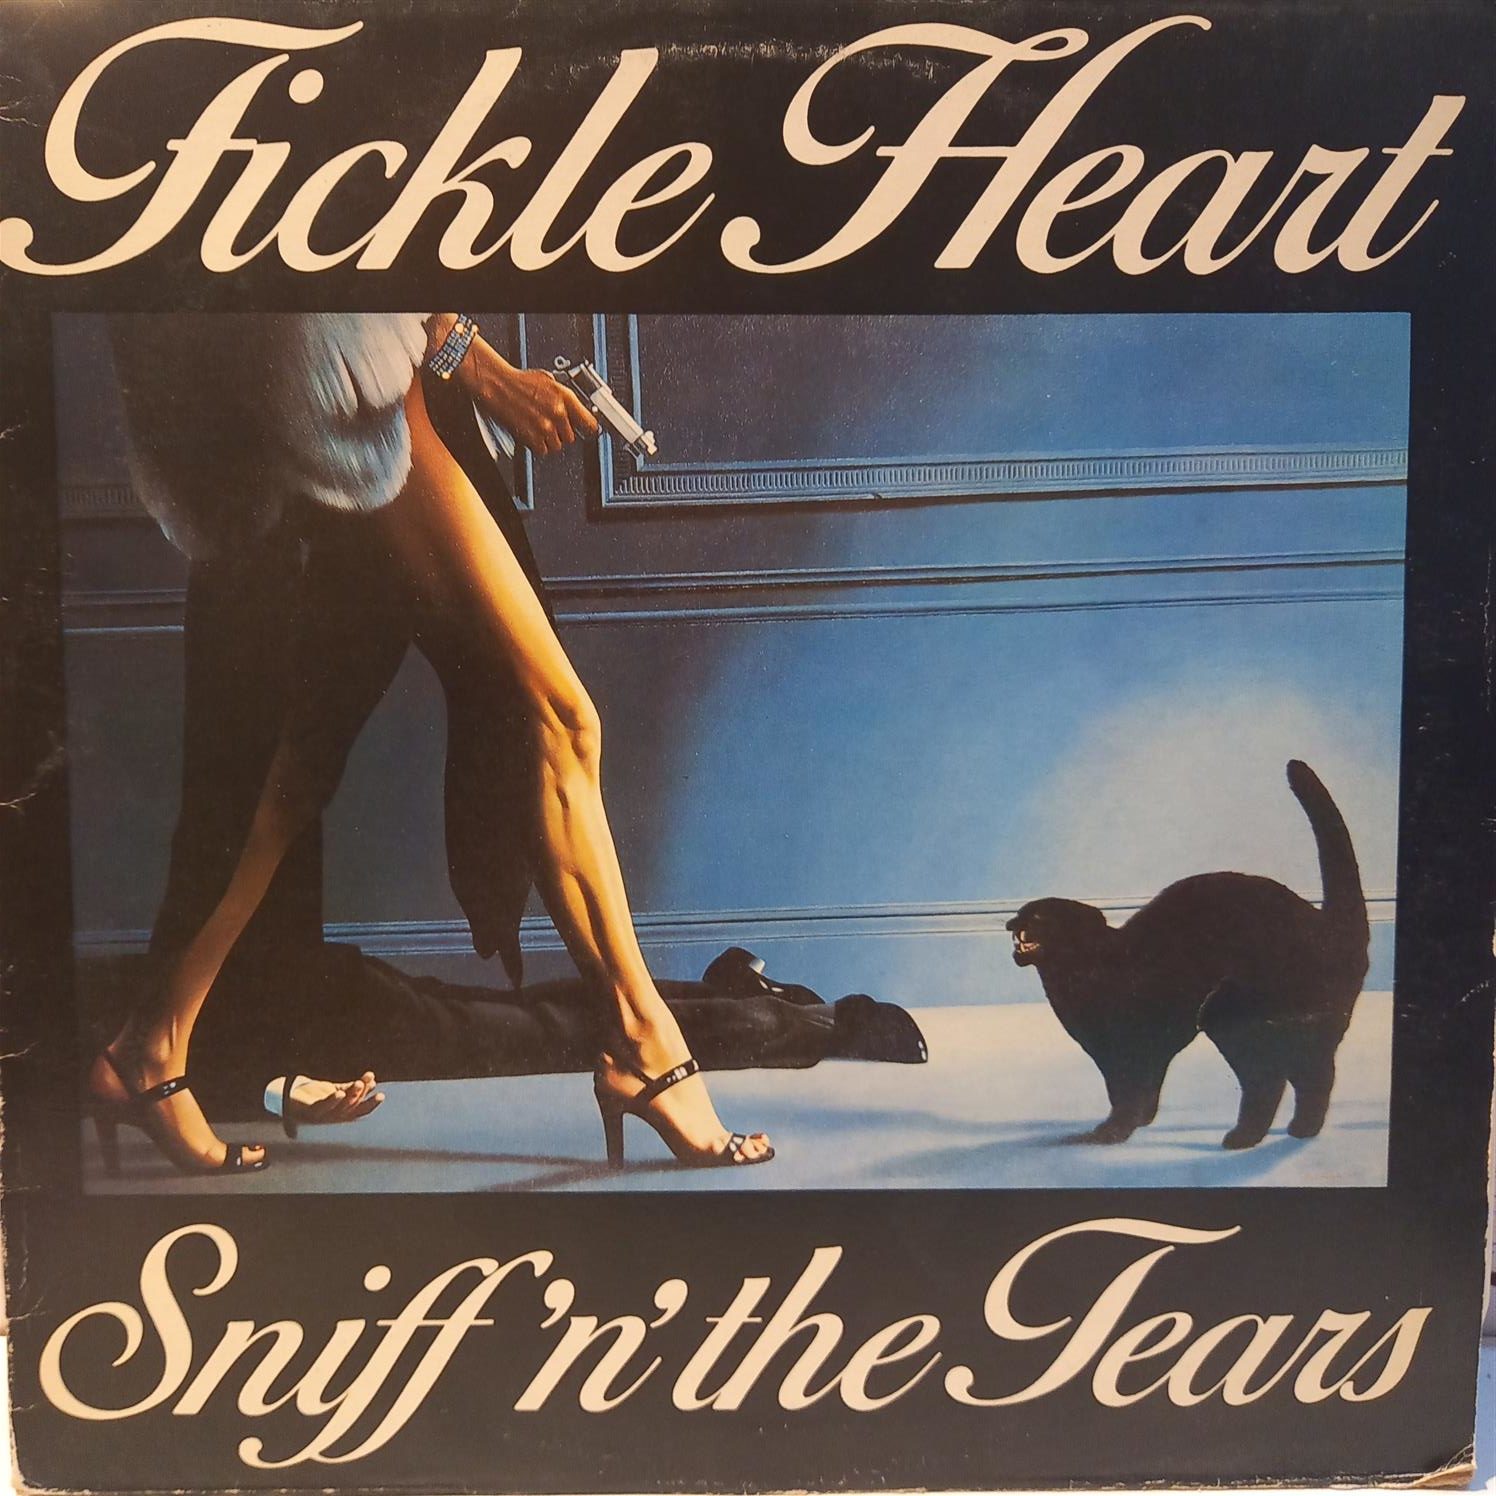 SNIFF’N’THE TEARS – FICKLE HEART ON